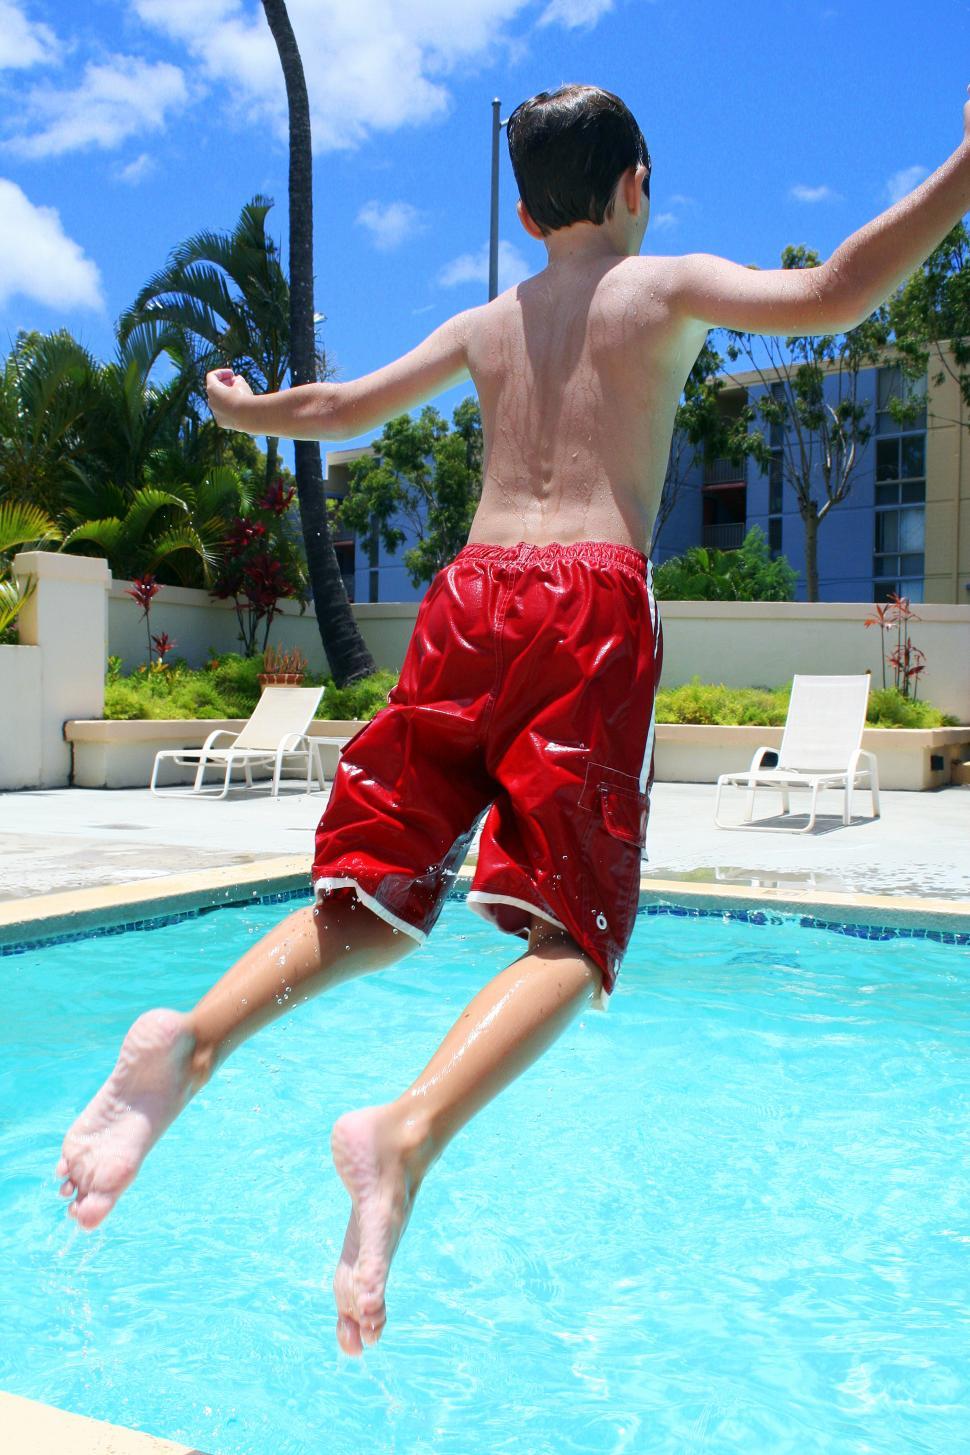 Download Free Stock Photo of Boy jumping into the pool 